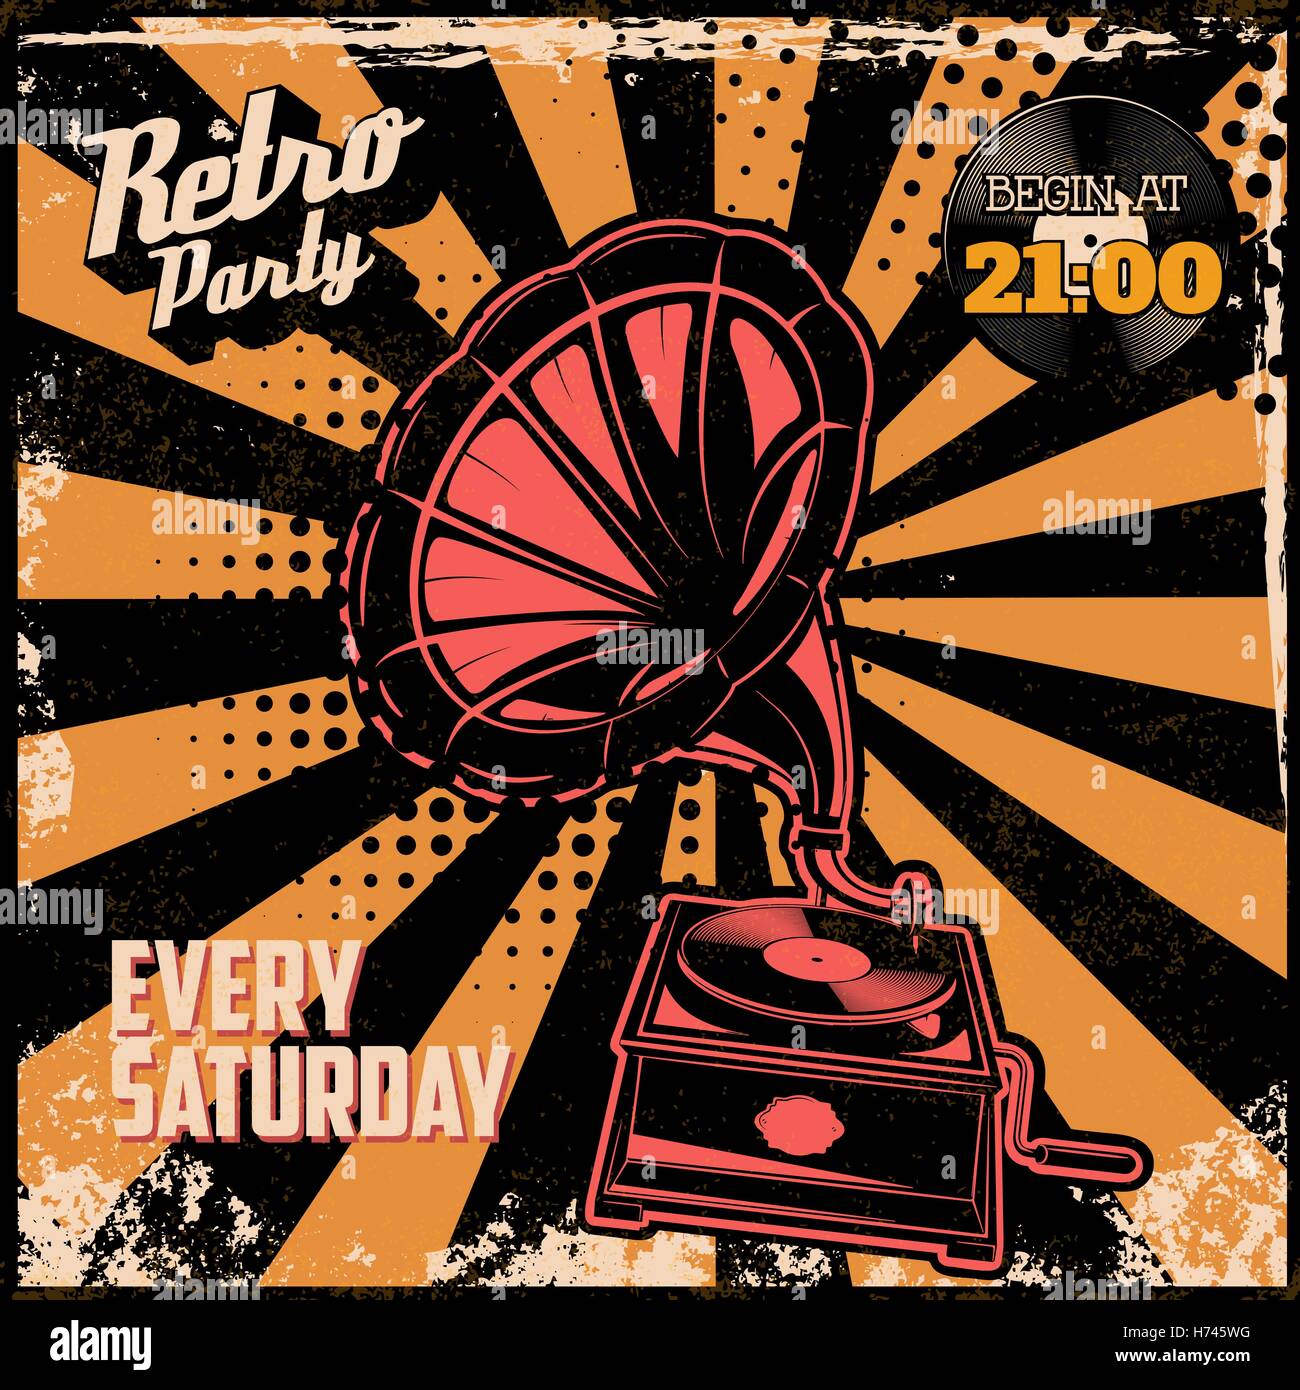 Retro Grunge Party Flyer Template - Download in Word, Google Docs